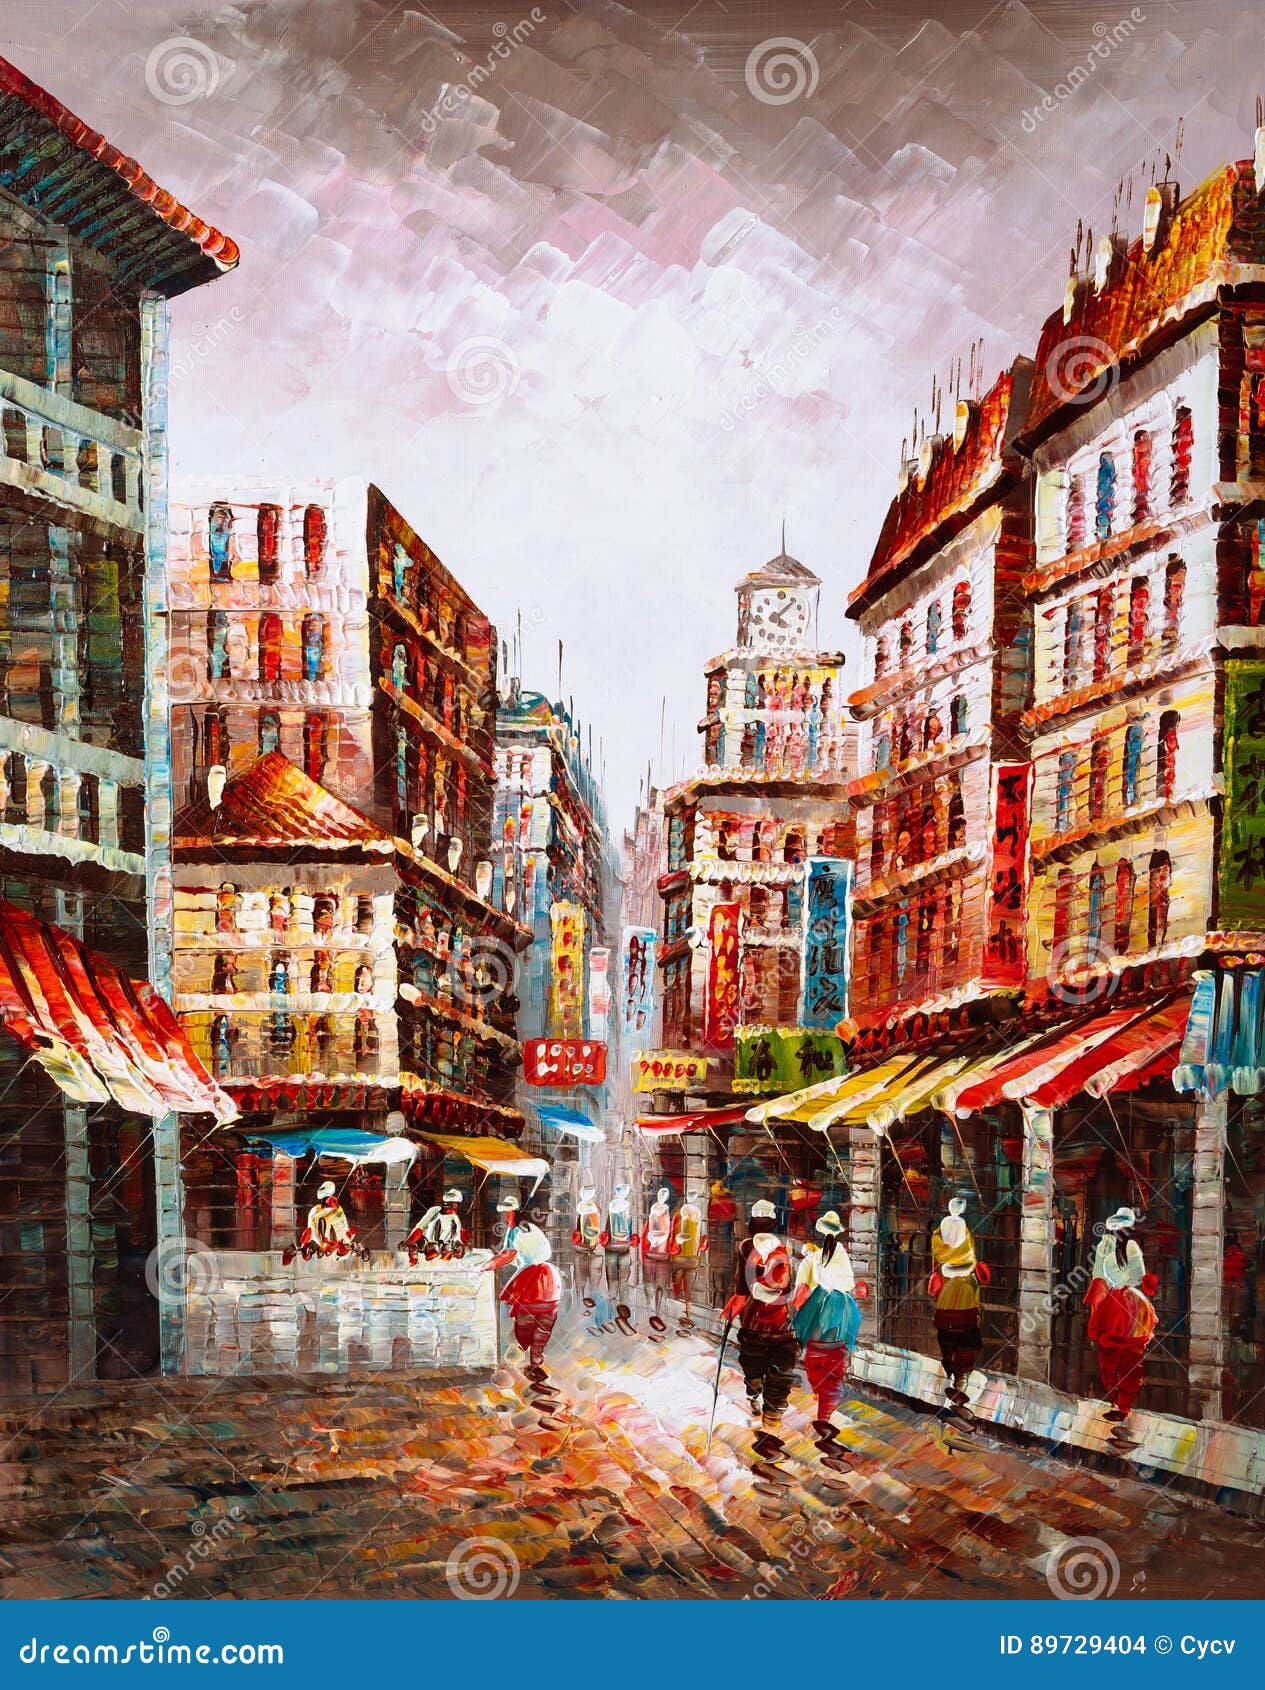 Oil Painting - Street View Of Hong Kong Stock Illustration ...